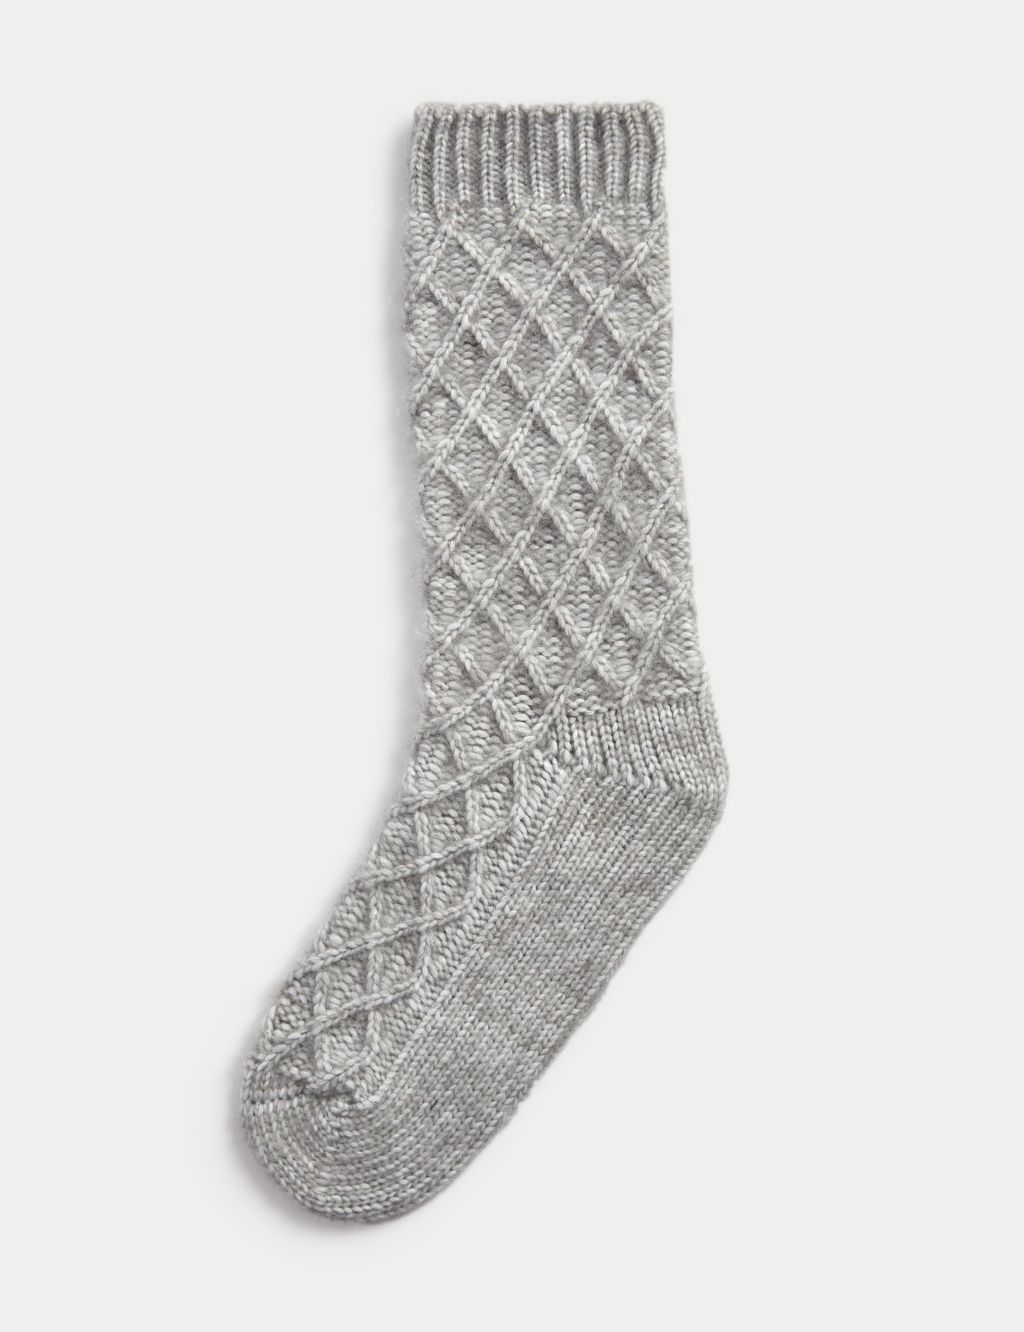 Recycled Textured Thermal Socks image 1